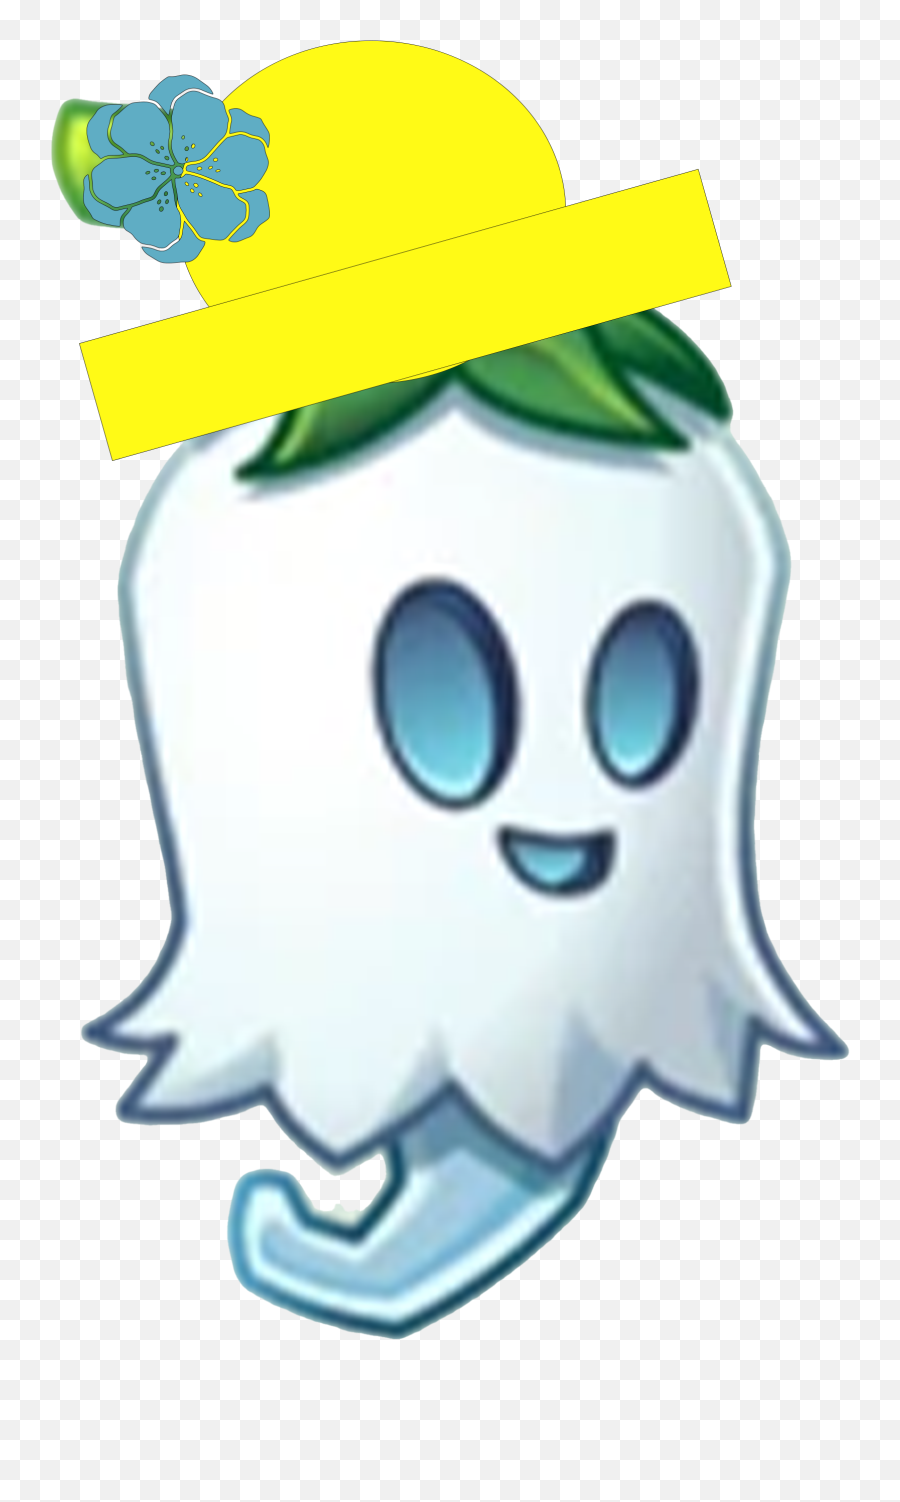 I Want This In Plants Vs Zombies 2 - Ghost Emoji,Good Shit Emoticon Deviantart